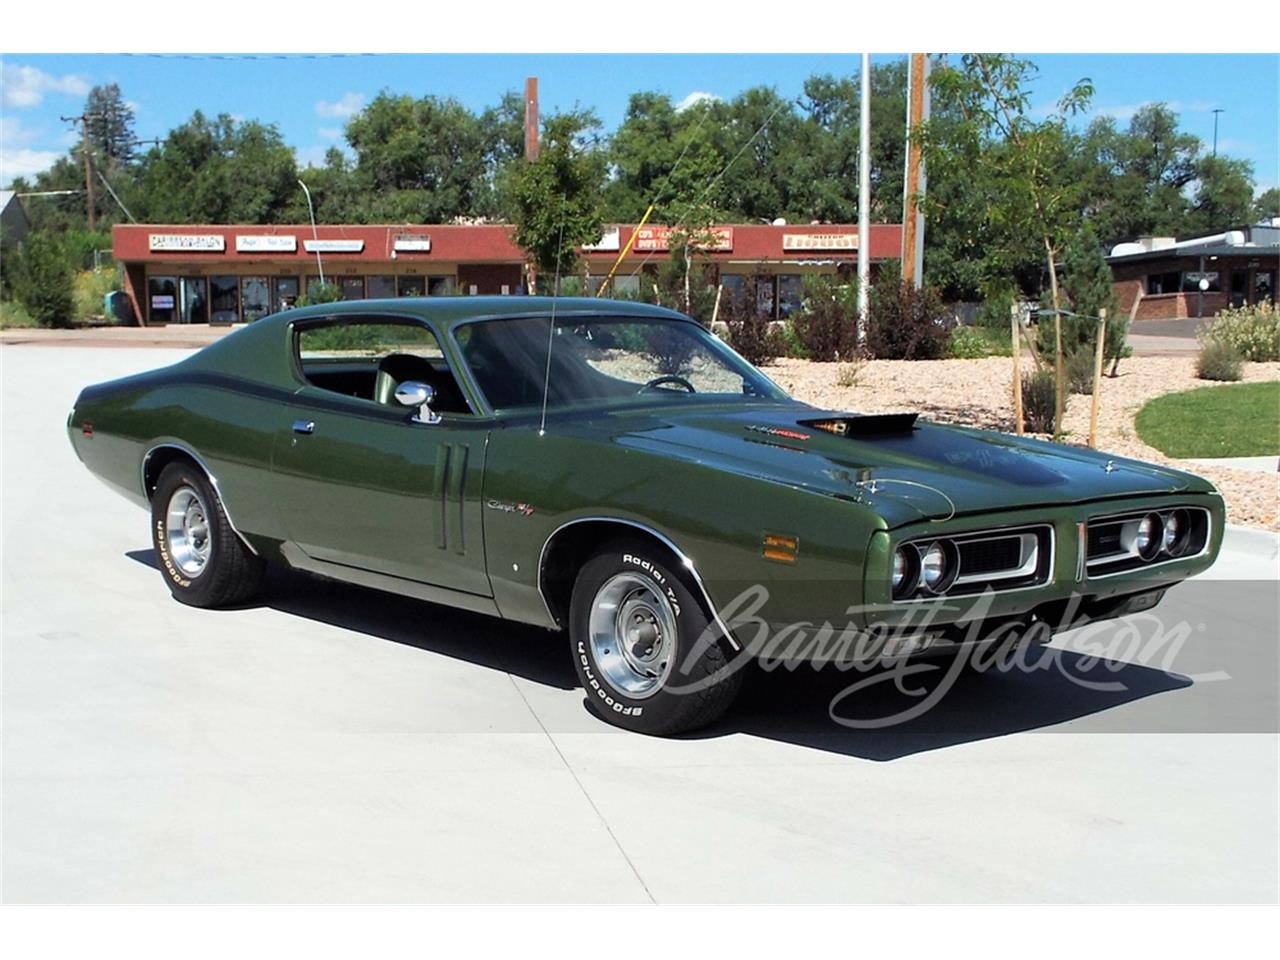 For Sale at Auction: 1971 Dodge Charger R/T in Scottsdale, Arizona for sale in Scottsdale, AZ